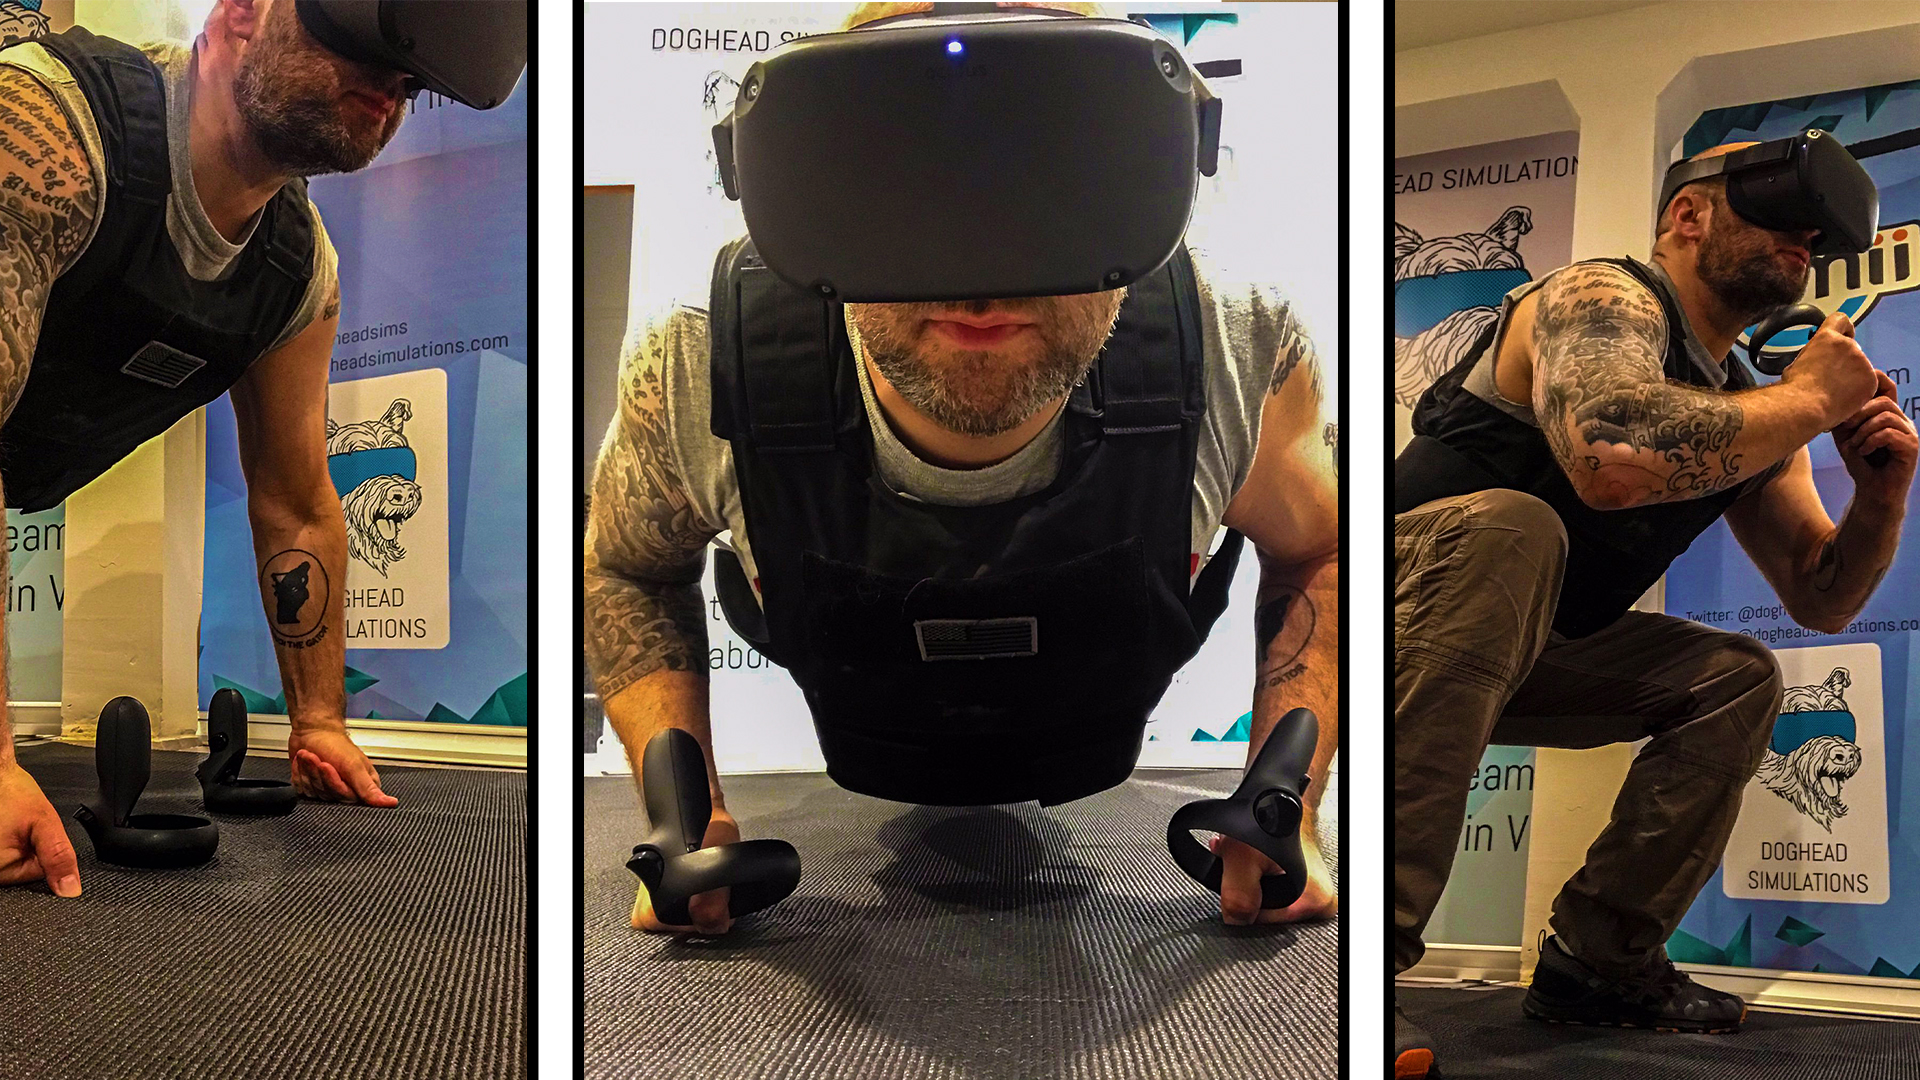 Doghead Simulations Ceo Turns Vr Social Platform Into His Own Personal Gym Vrscout - exercise simulator roblox